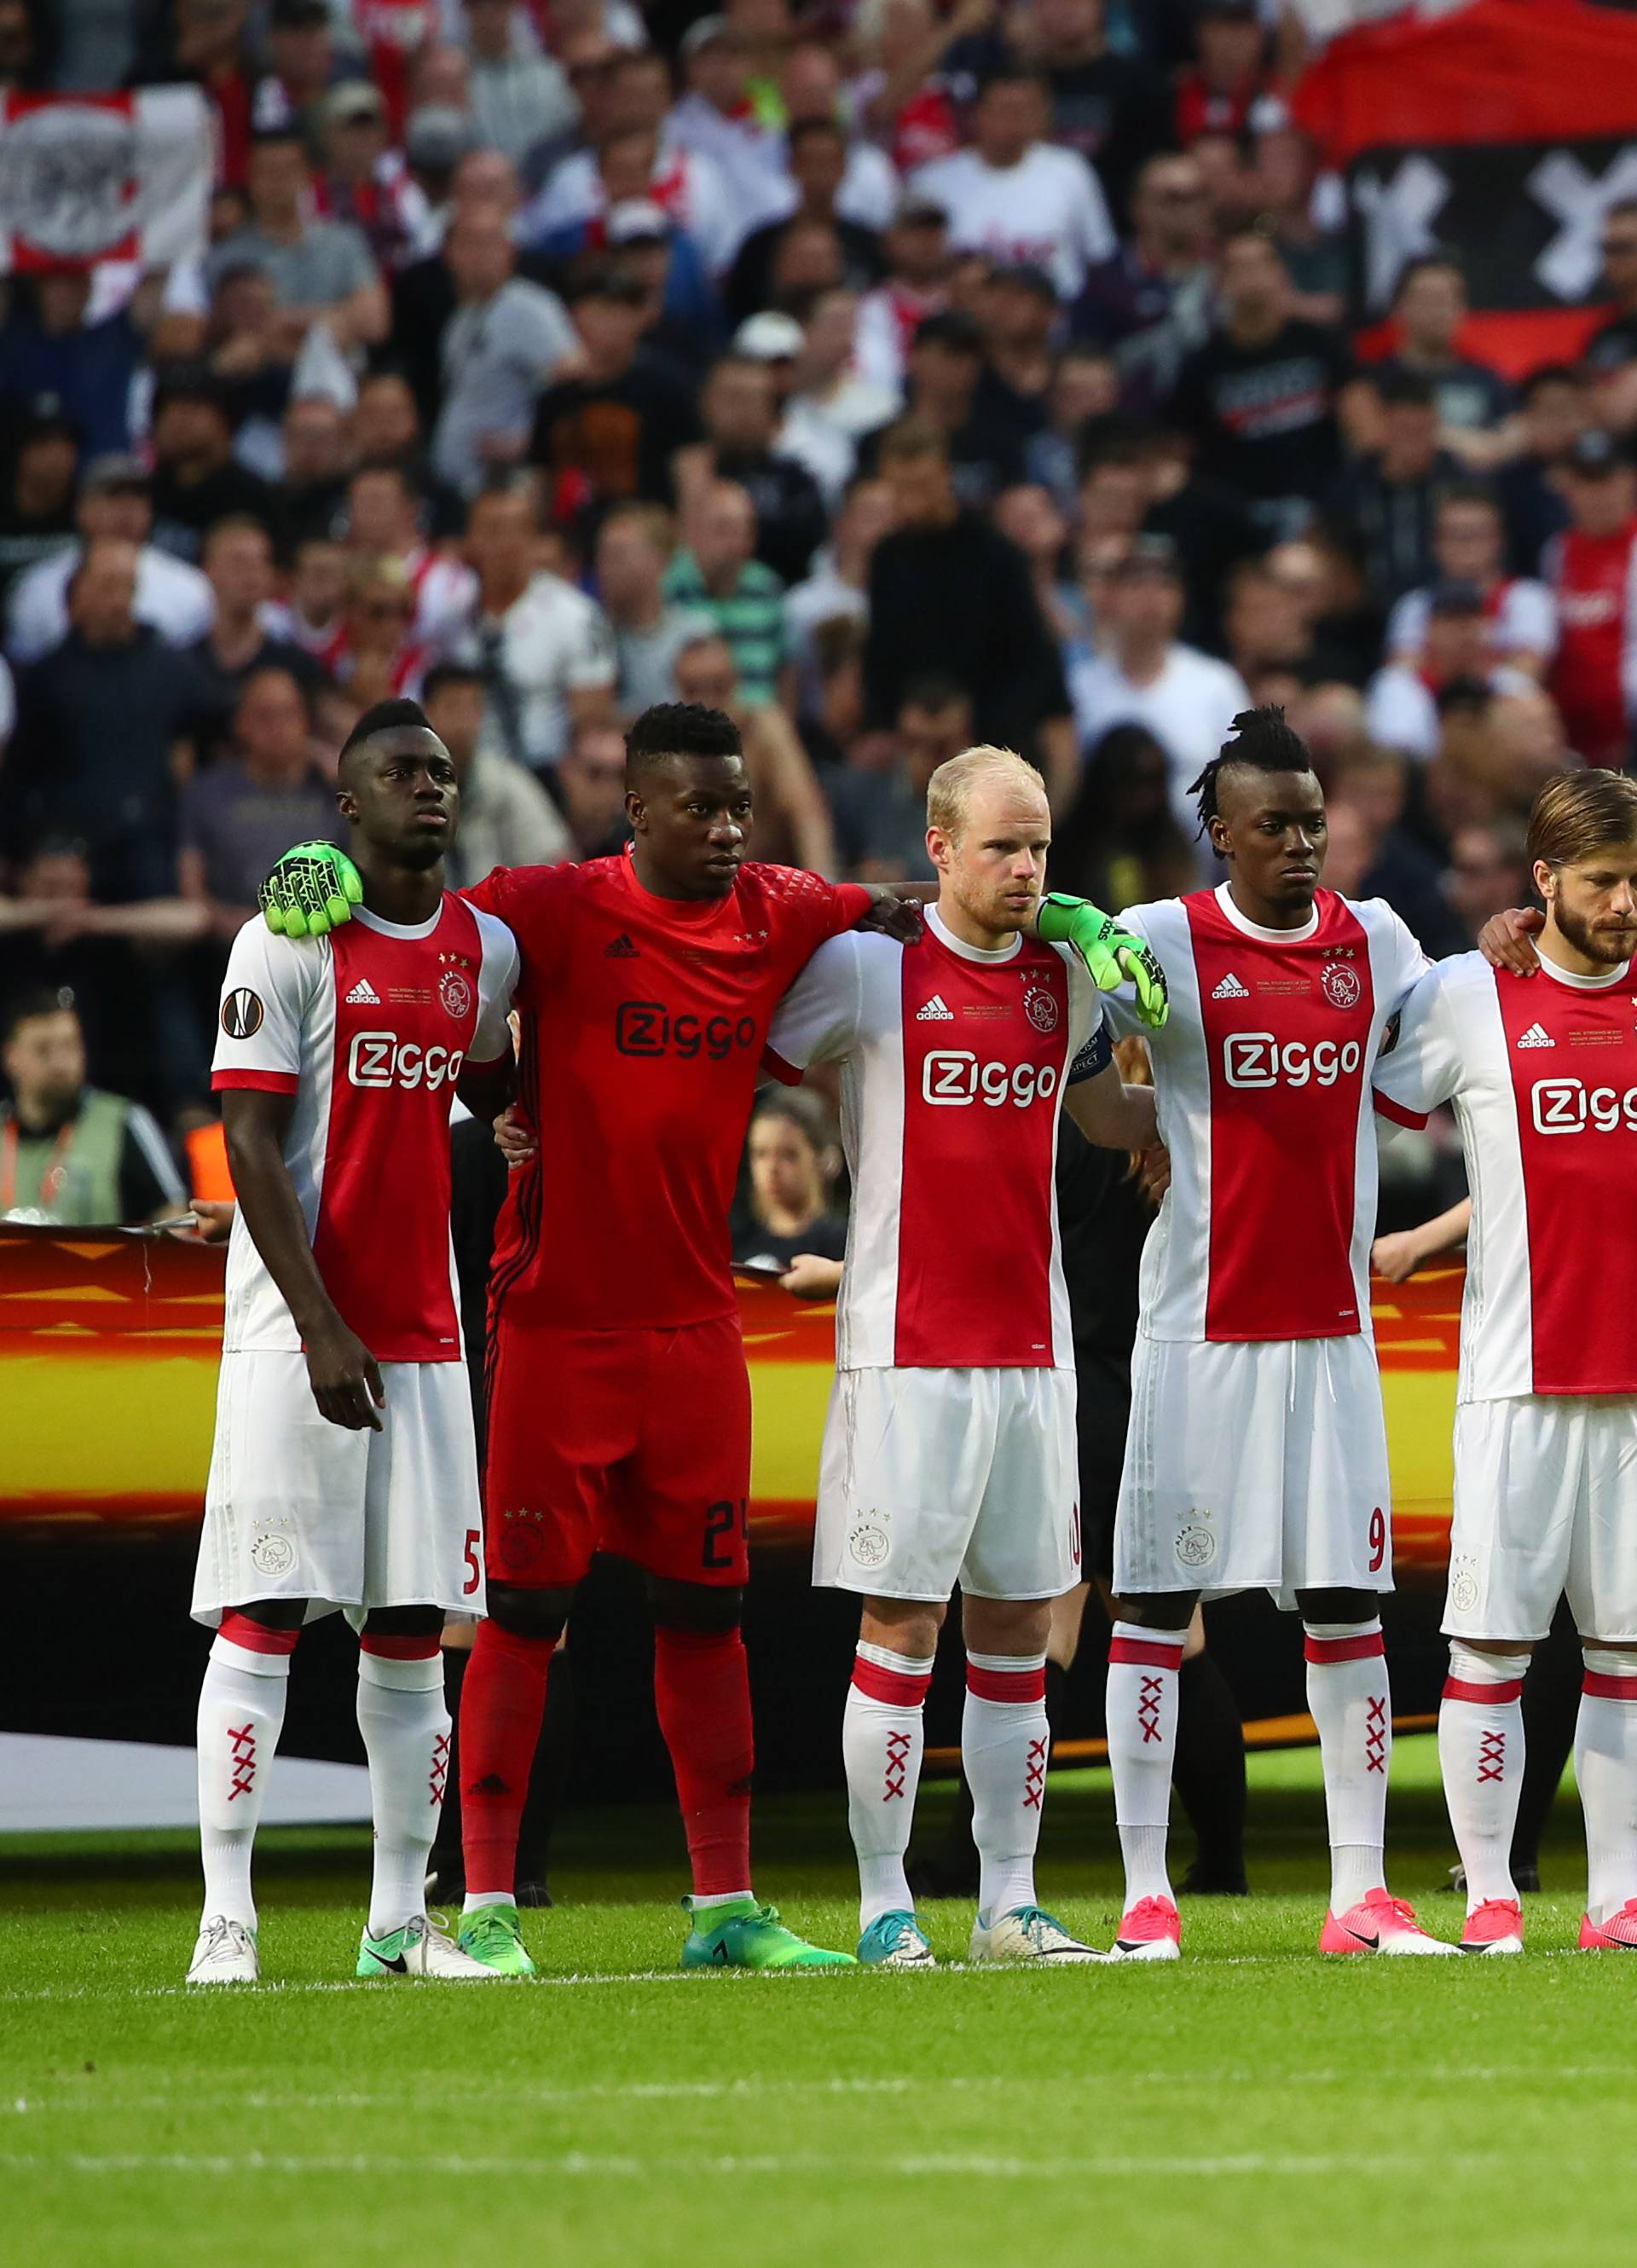 Ajax players observe a minute of silence in tribute to the victims of the Manchester attack